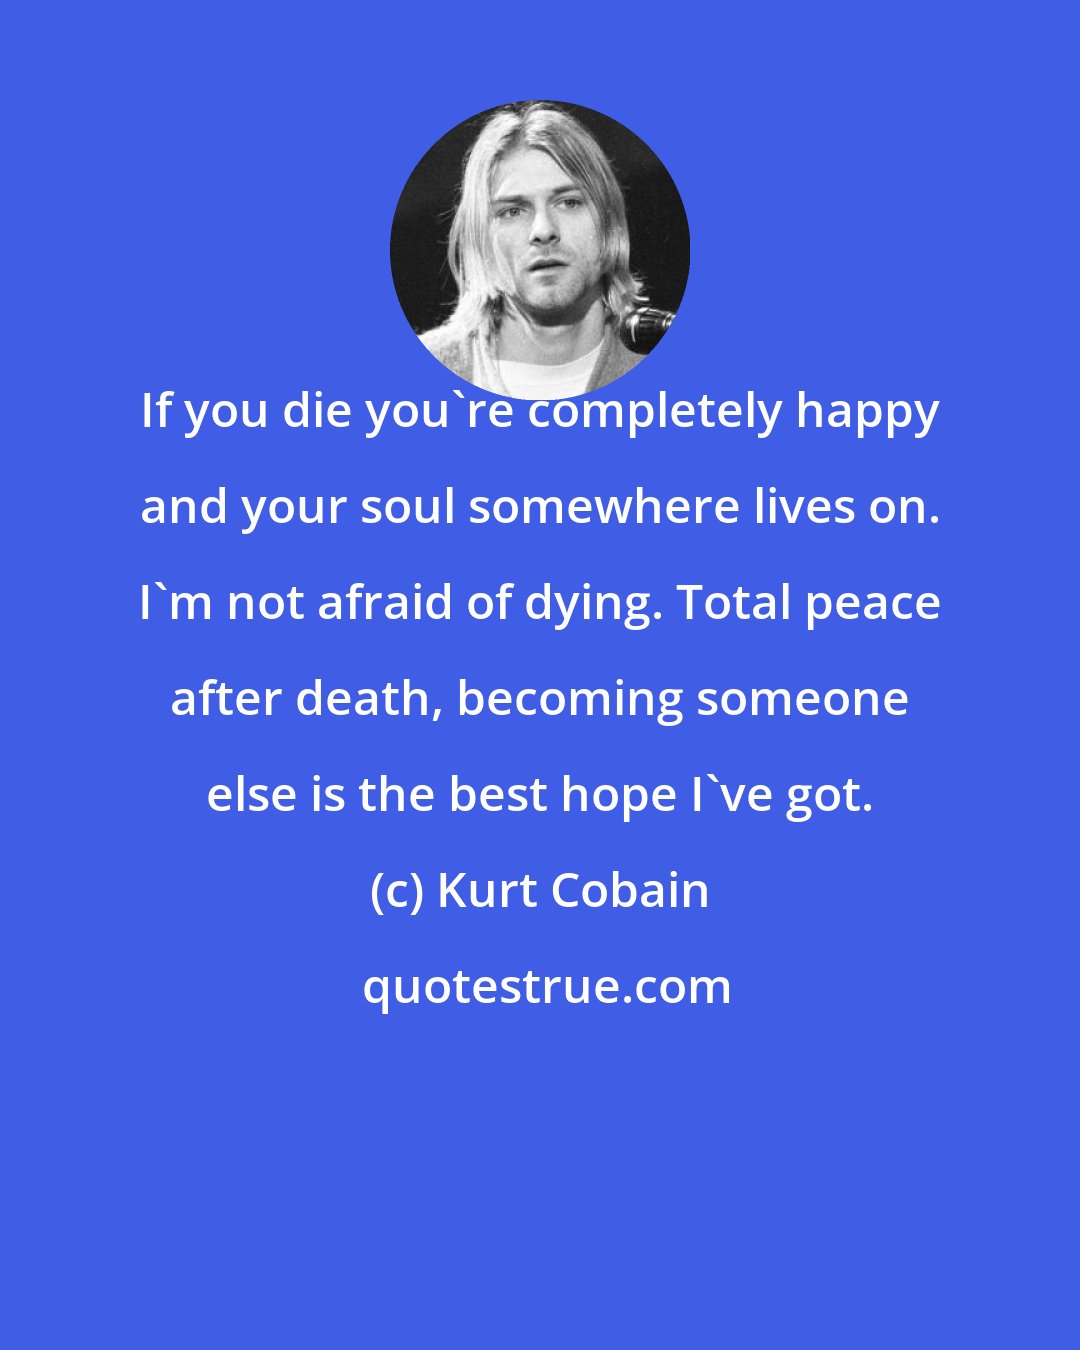 Kurt Cobain: If you die you're completely happy and your soul somewhere lives on. I'm not afraid of dying. Total peace after death, becoming someone else is the best hope I've got.